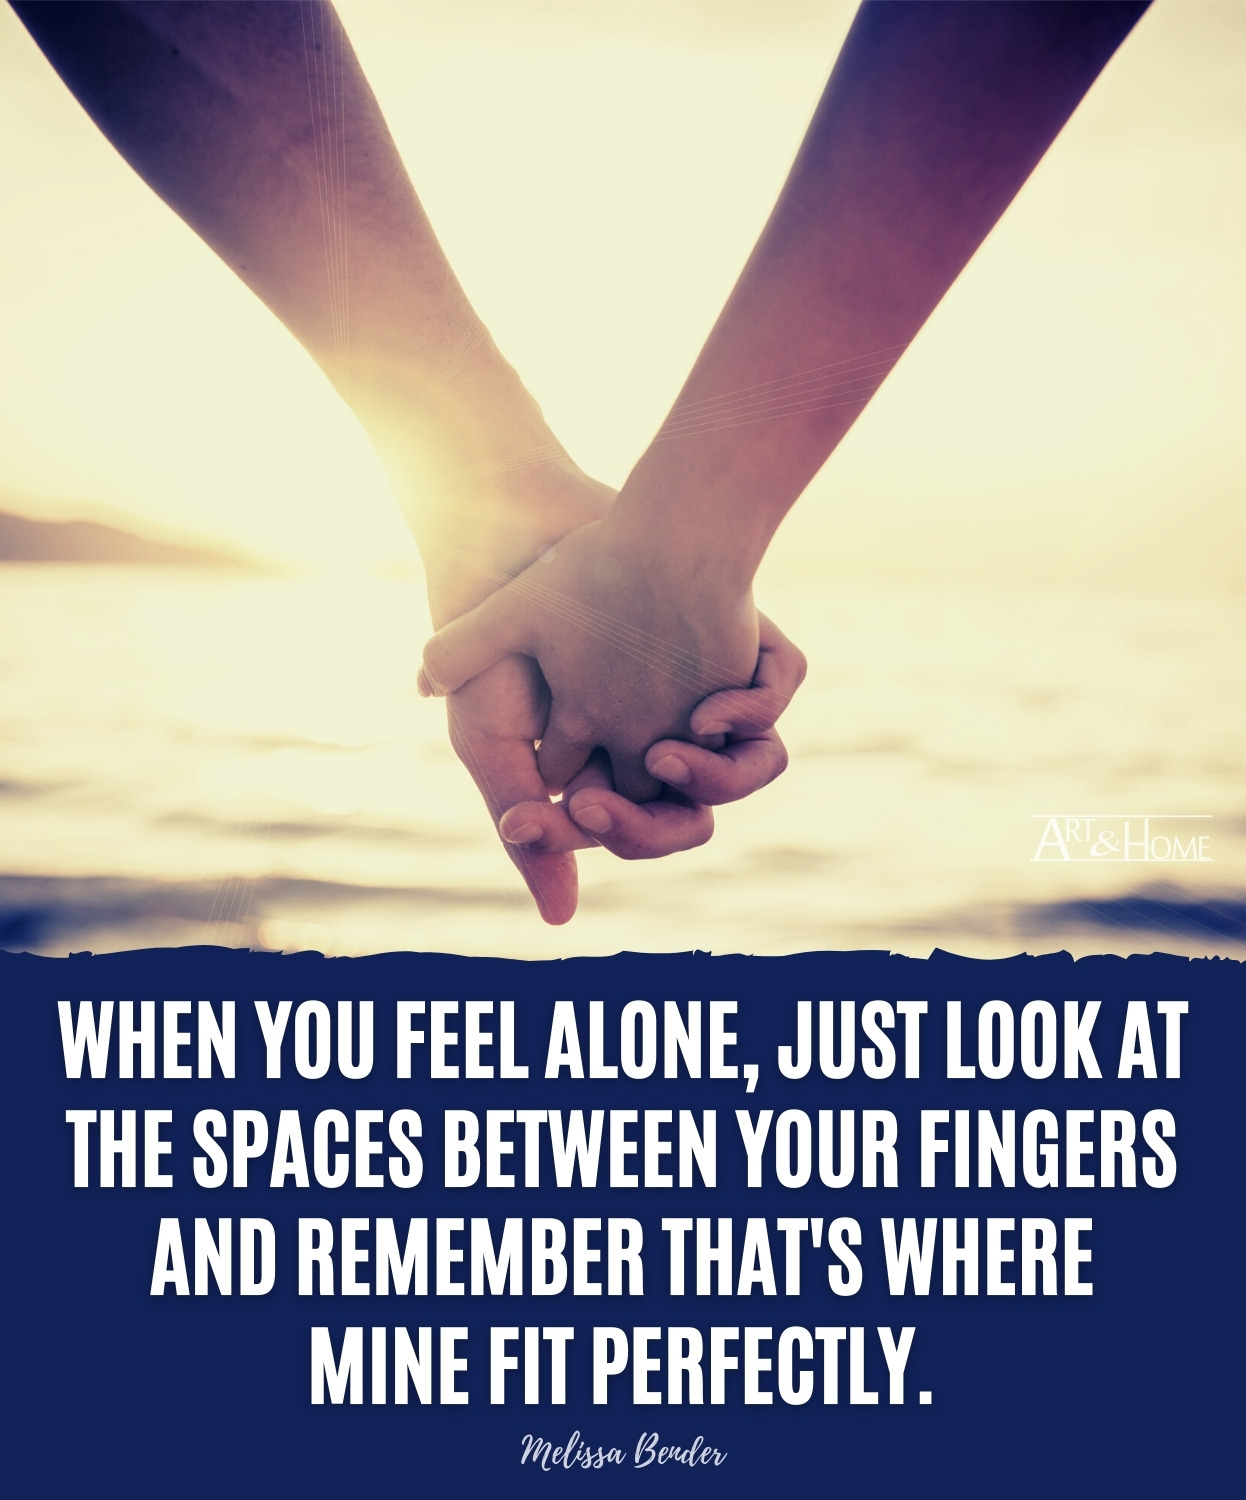 someone special love quotes